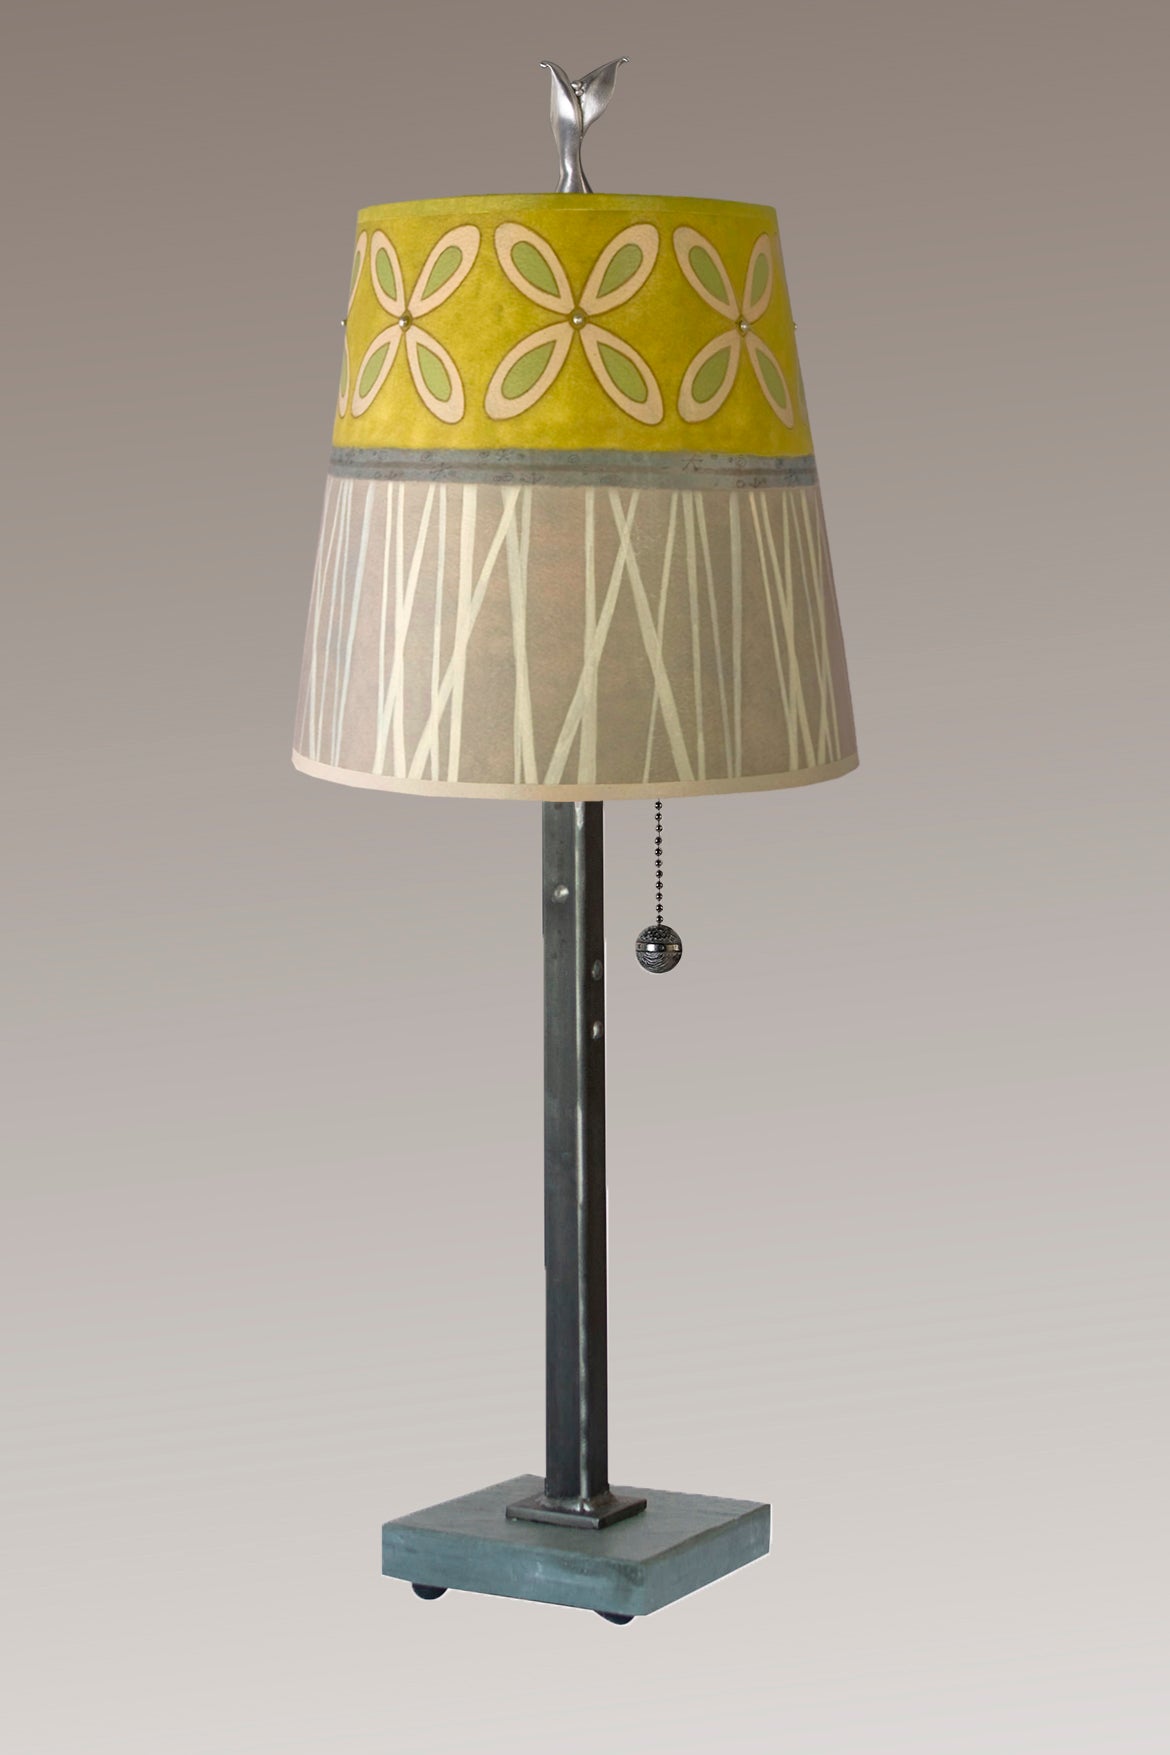 Janna Ugone &amp; Co Table Lamps Steel Table Lamp with Small Drum Shade in Kiwi